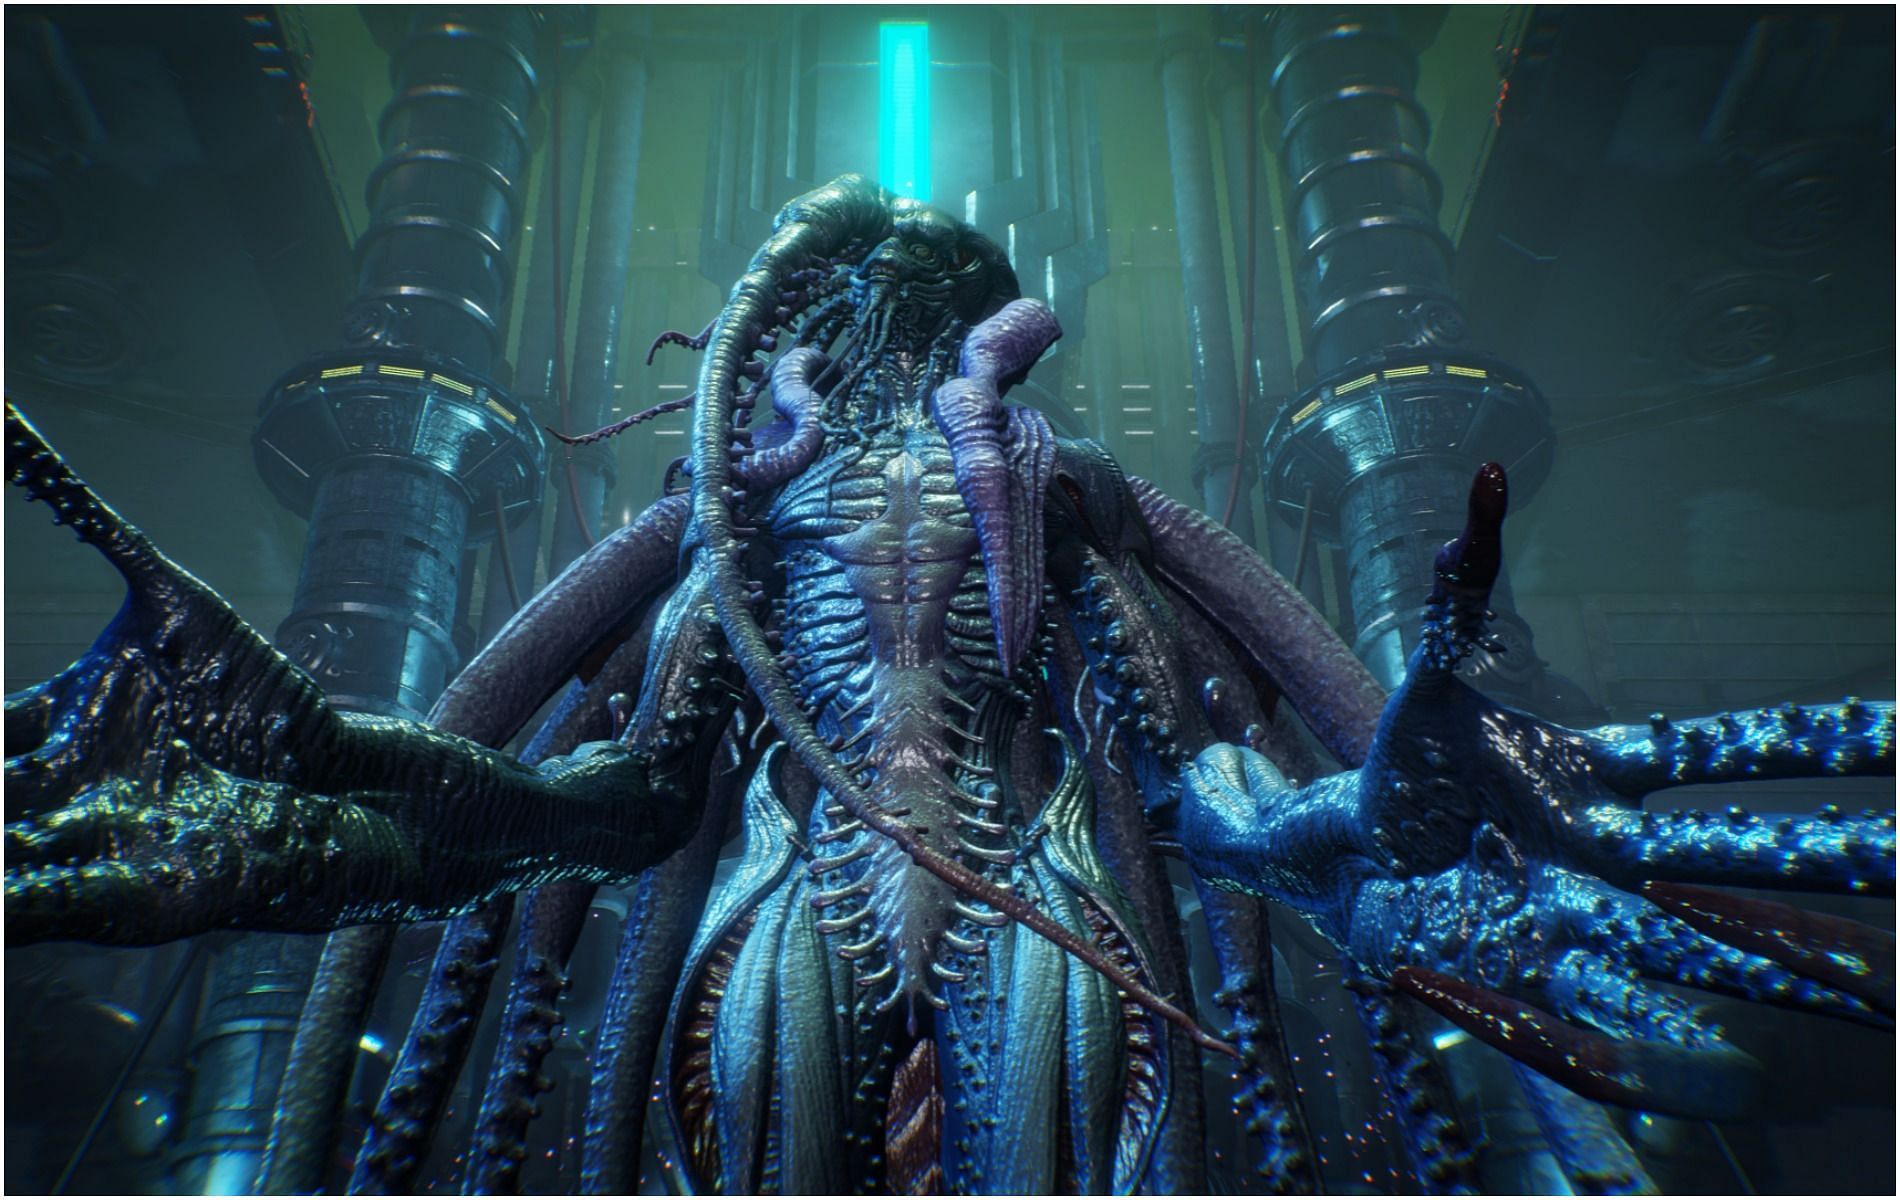 Kraken, one of the Four Fiends, was on full display in the recent trailer (Image via Square Enix)